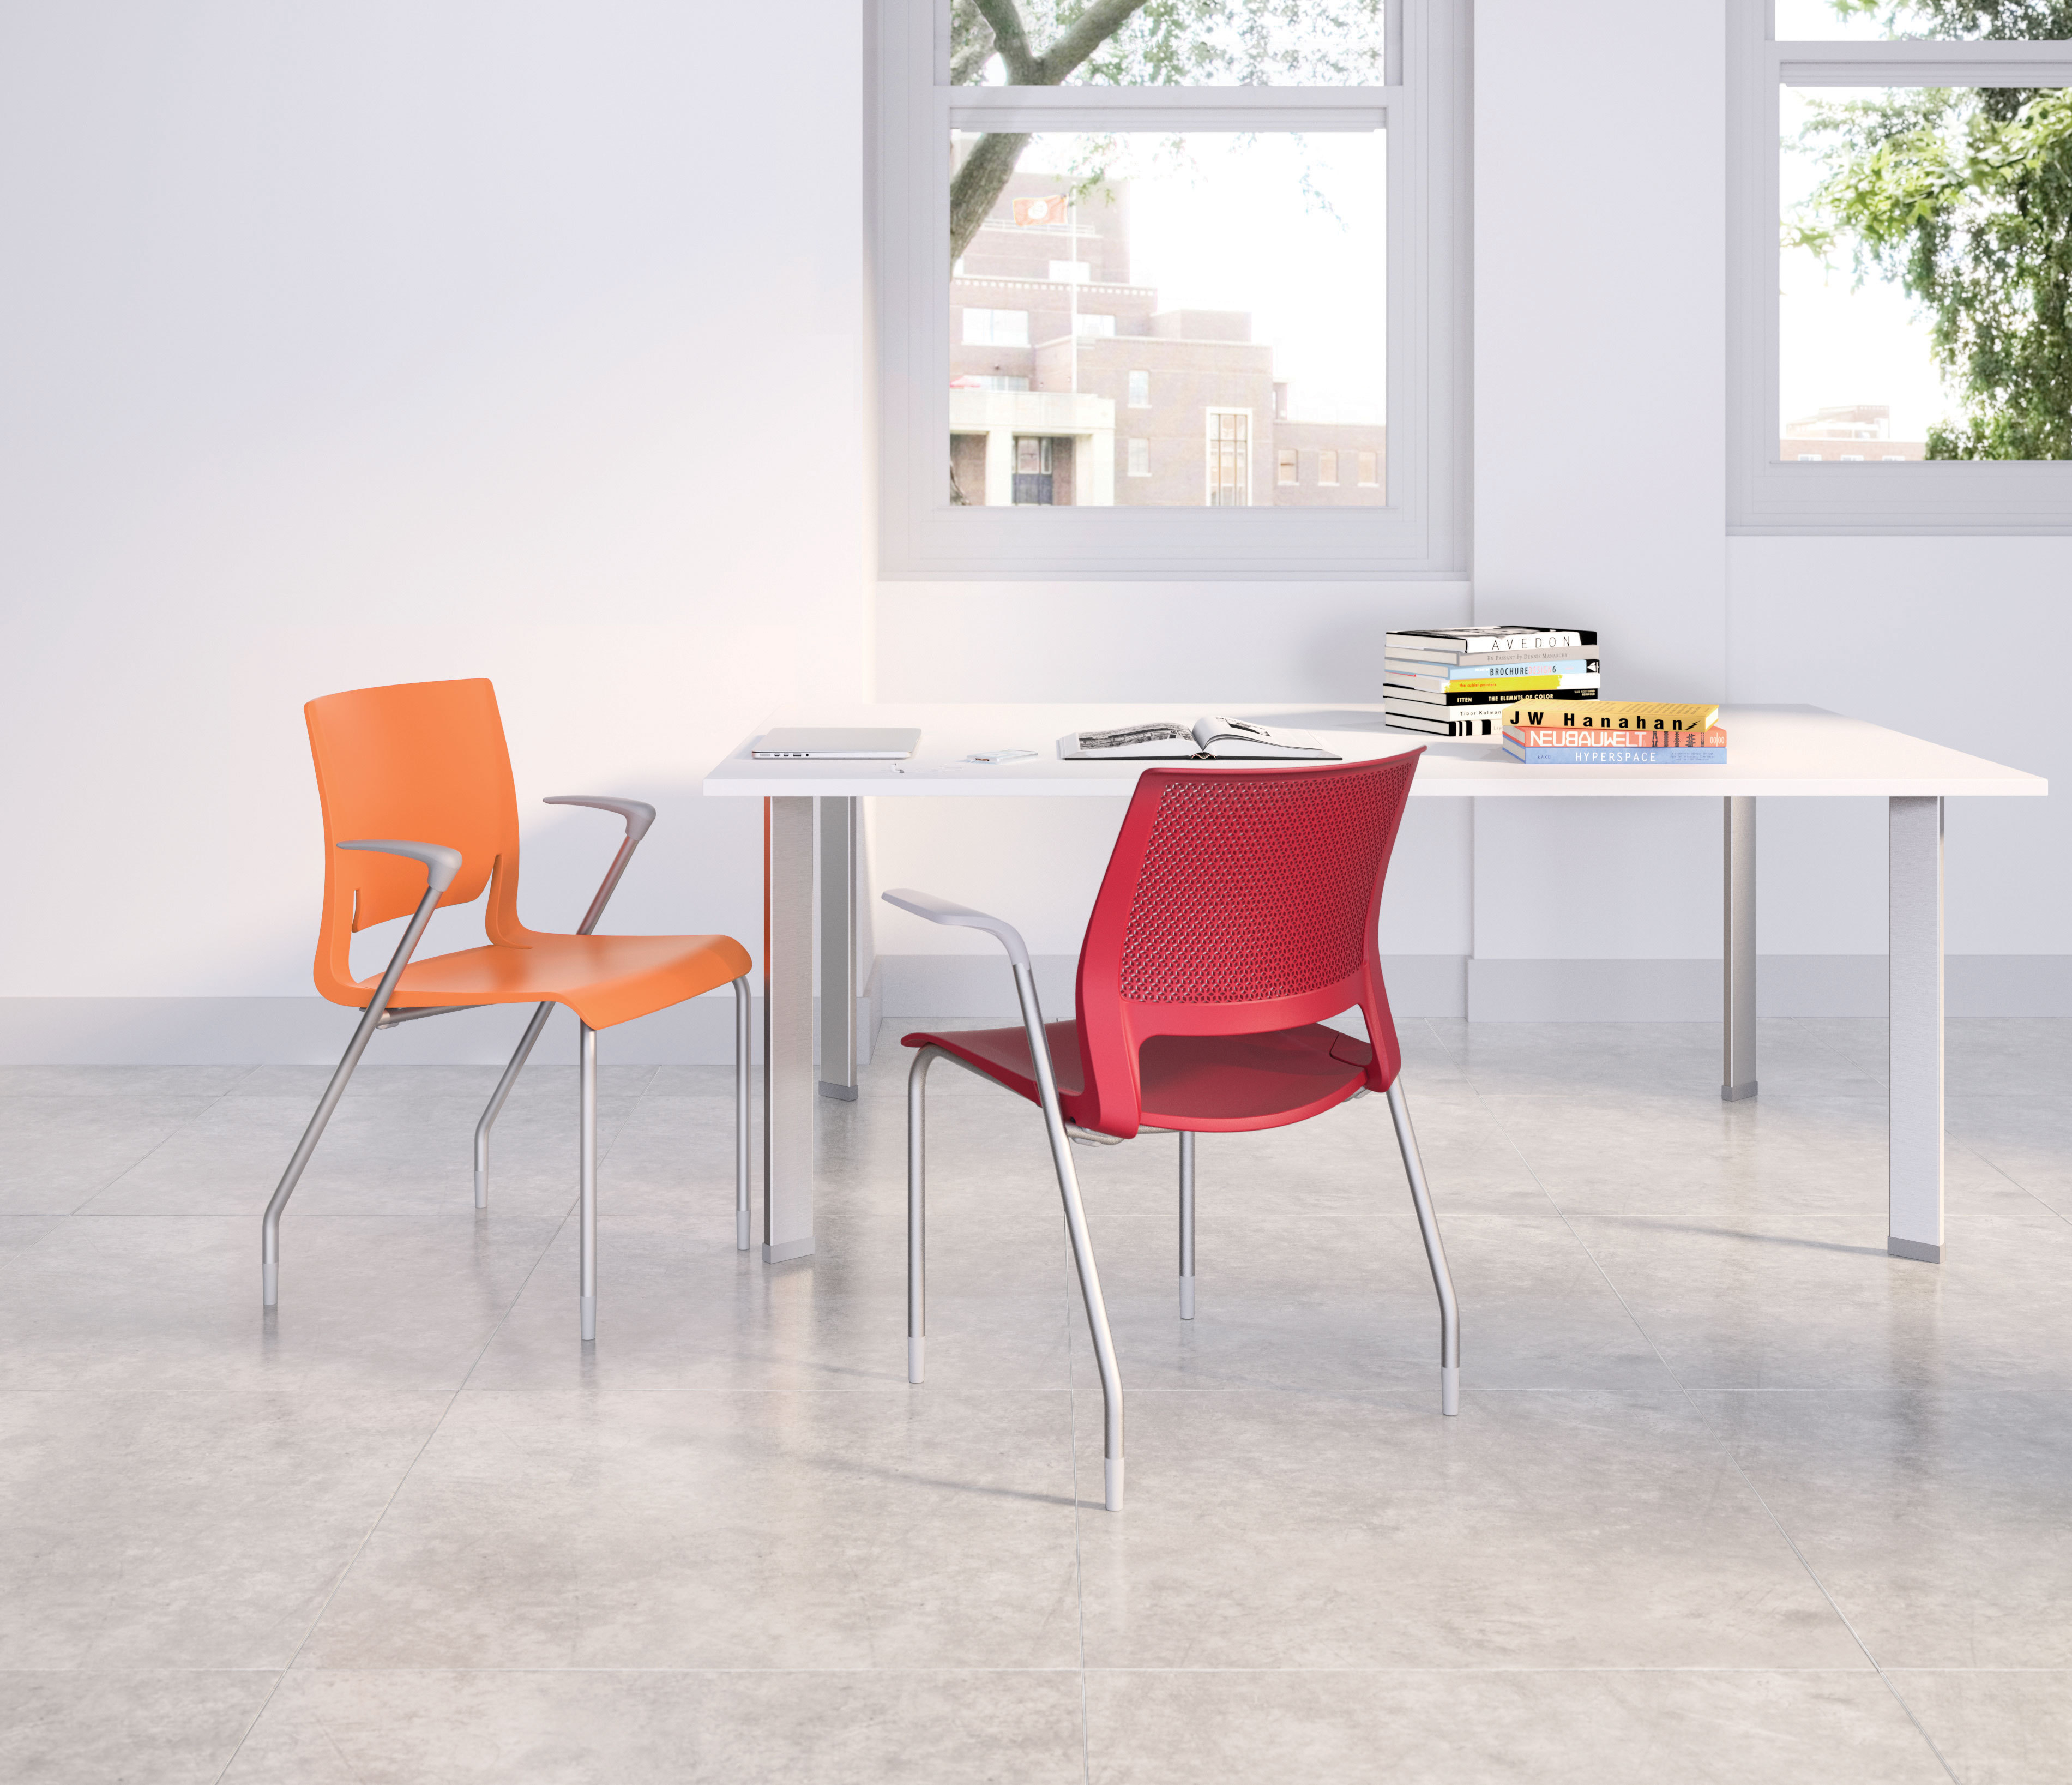 Sitonit Seating Launches Two New Multipurpose Chair And Stool